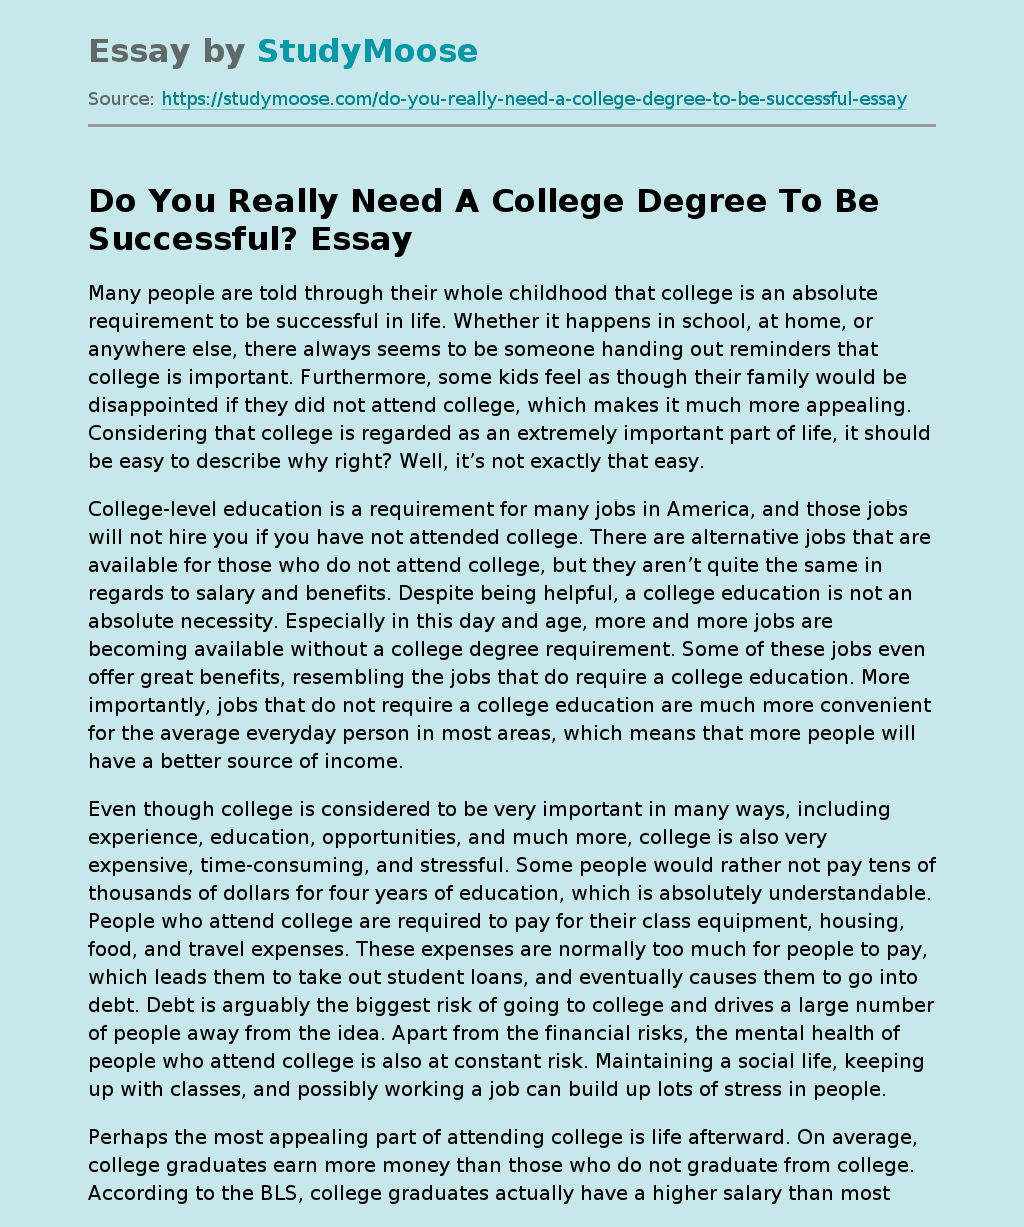 Do You Really Need A College Degree To Be Successful?